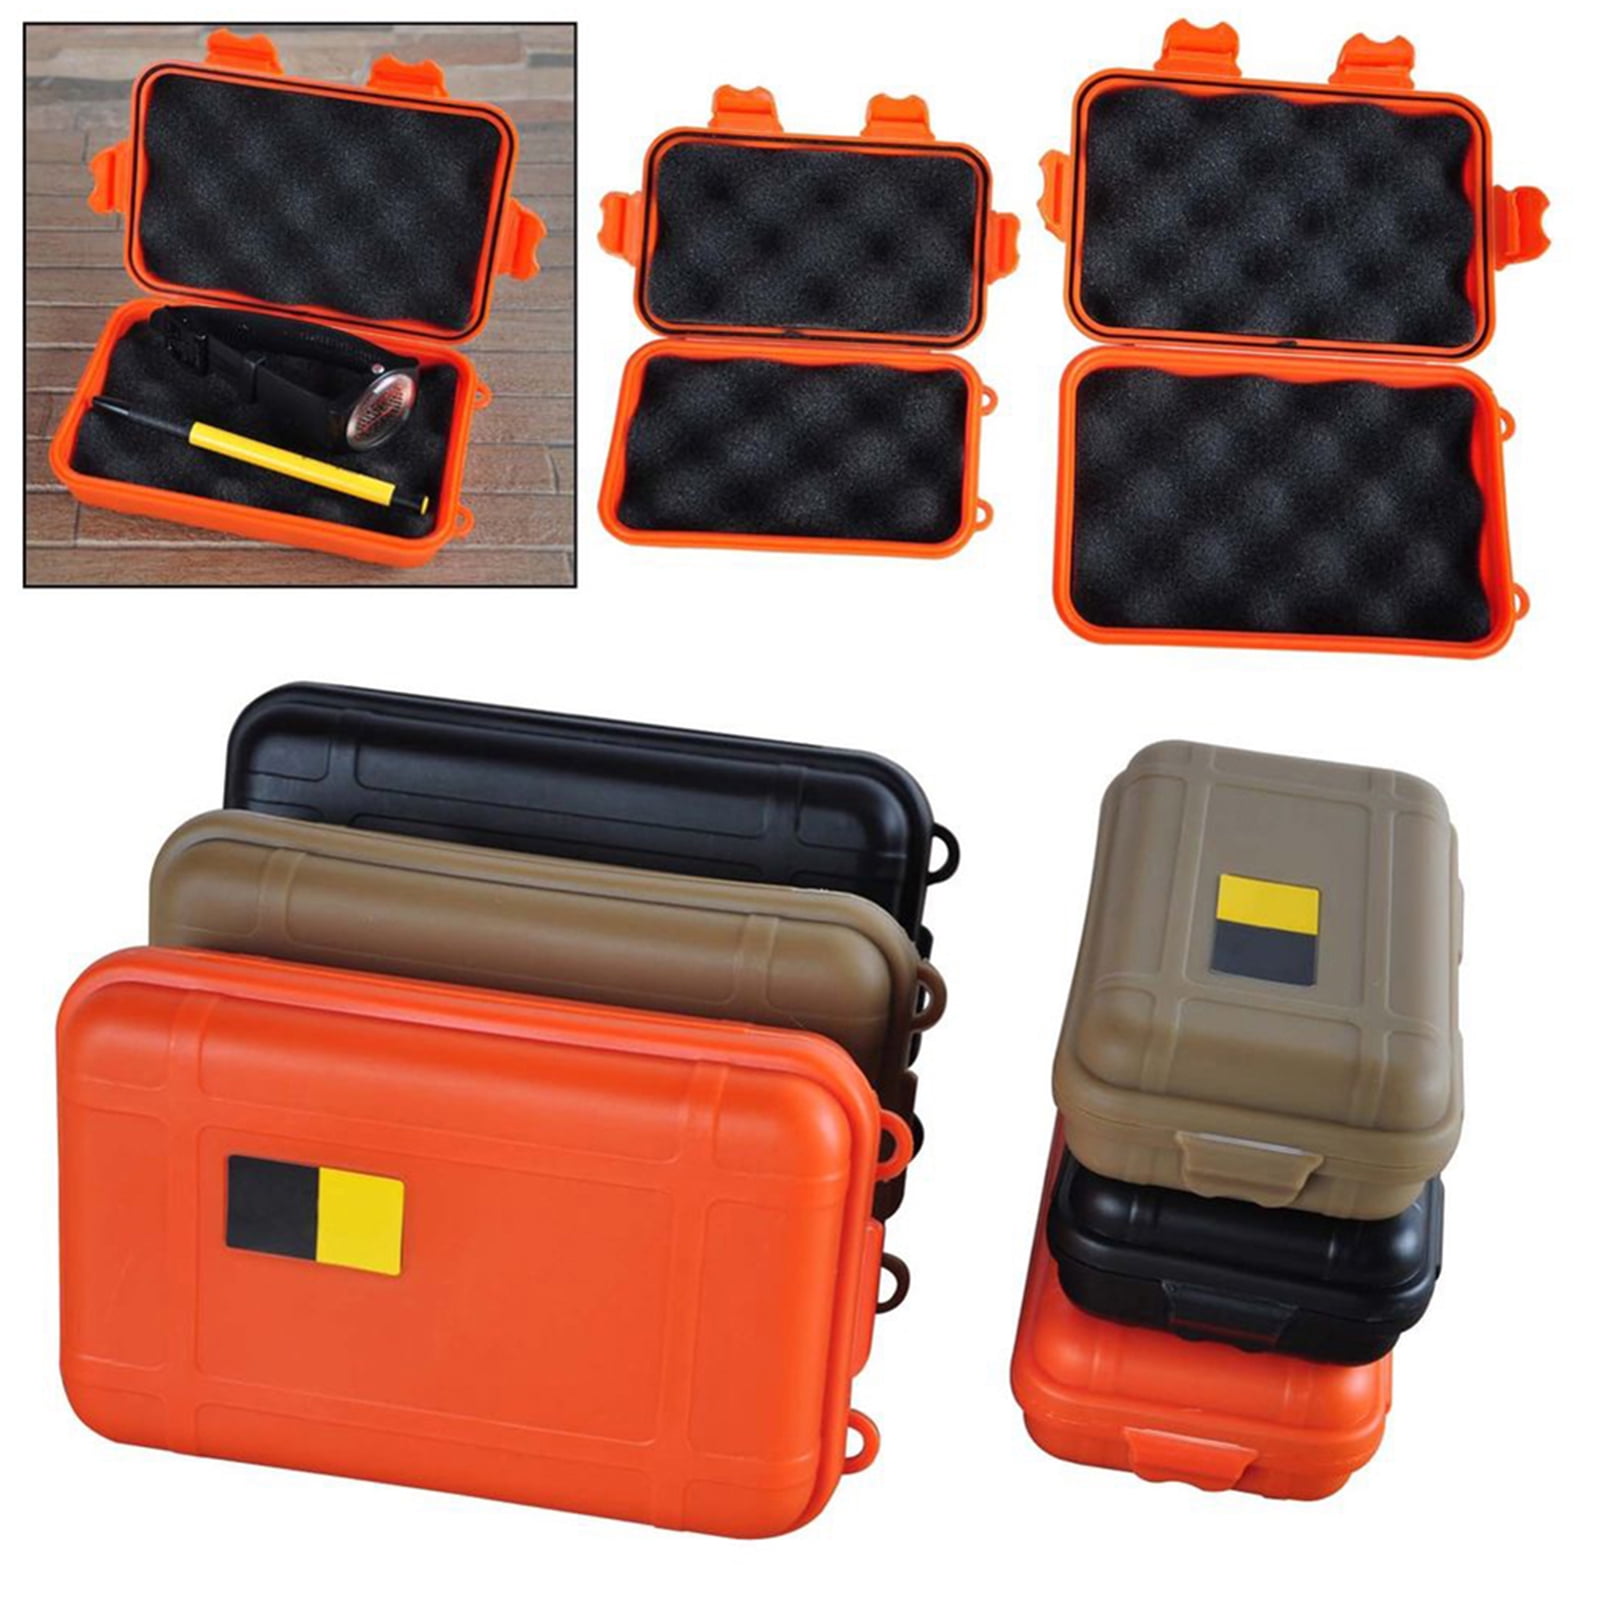 Waterproof Shockproof Plastic Survival Container Storage Case Carry Box 